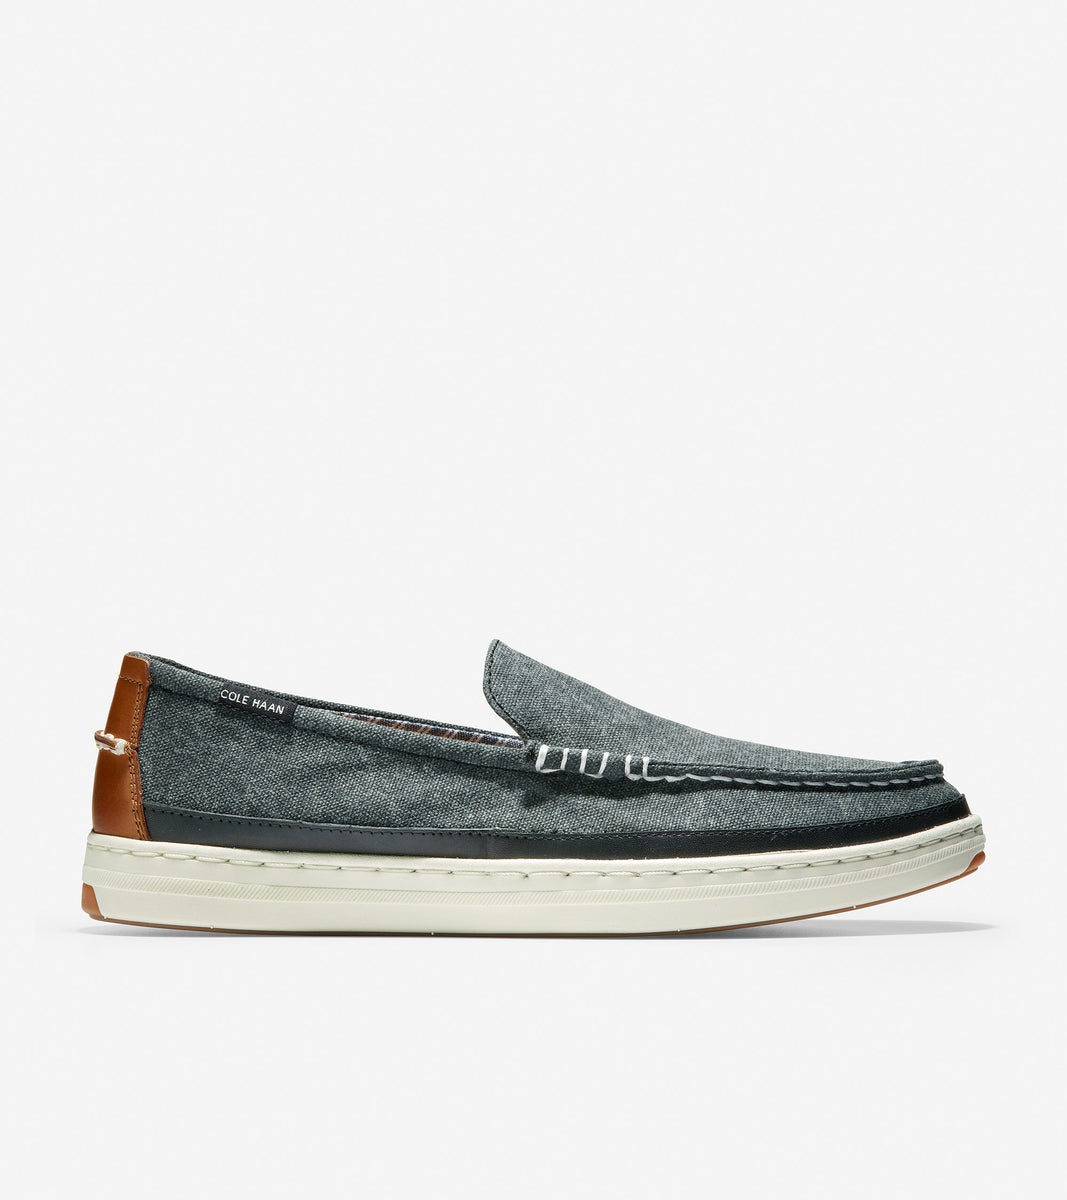 ColeHaan-Cloudfeel Weekender Loafer-c32223-Black Washed Canvas